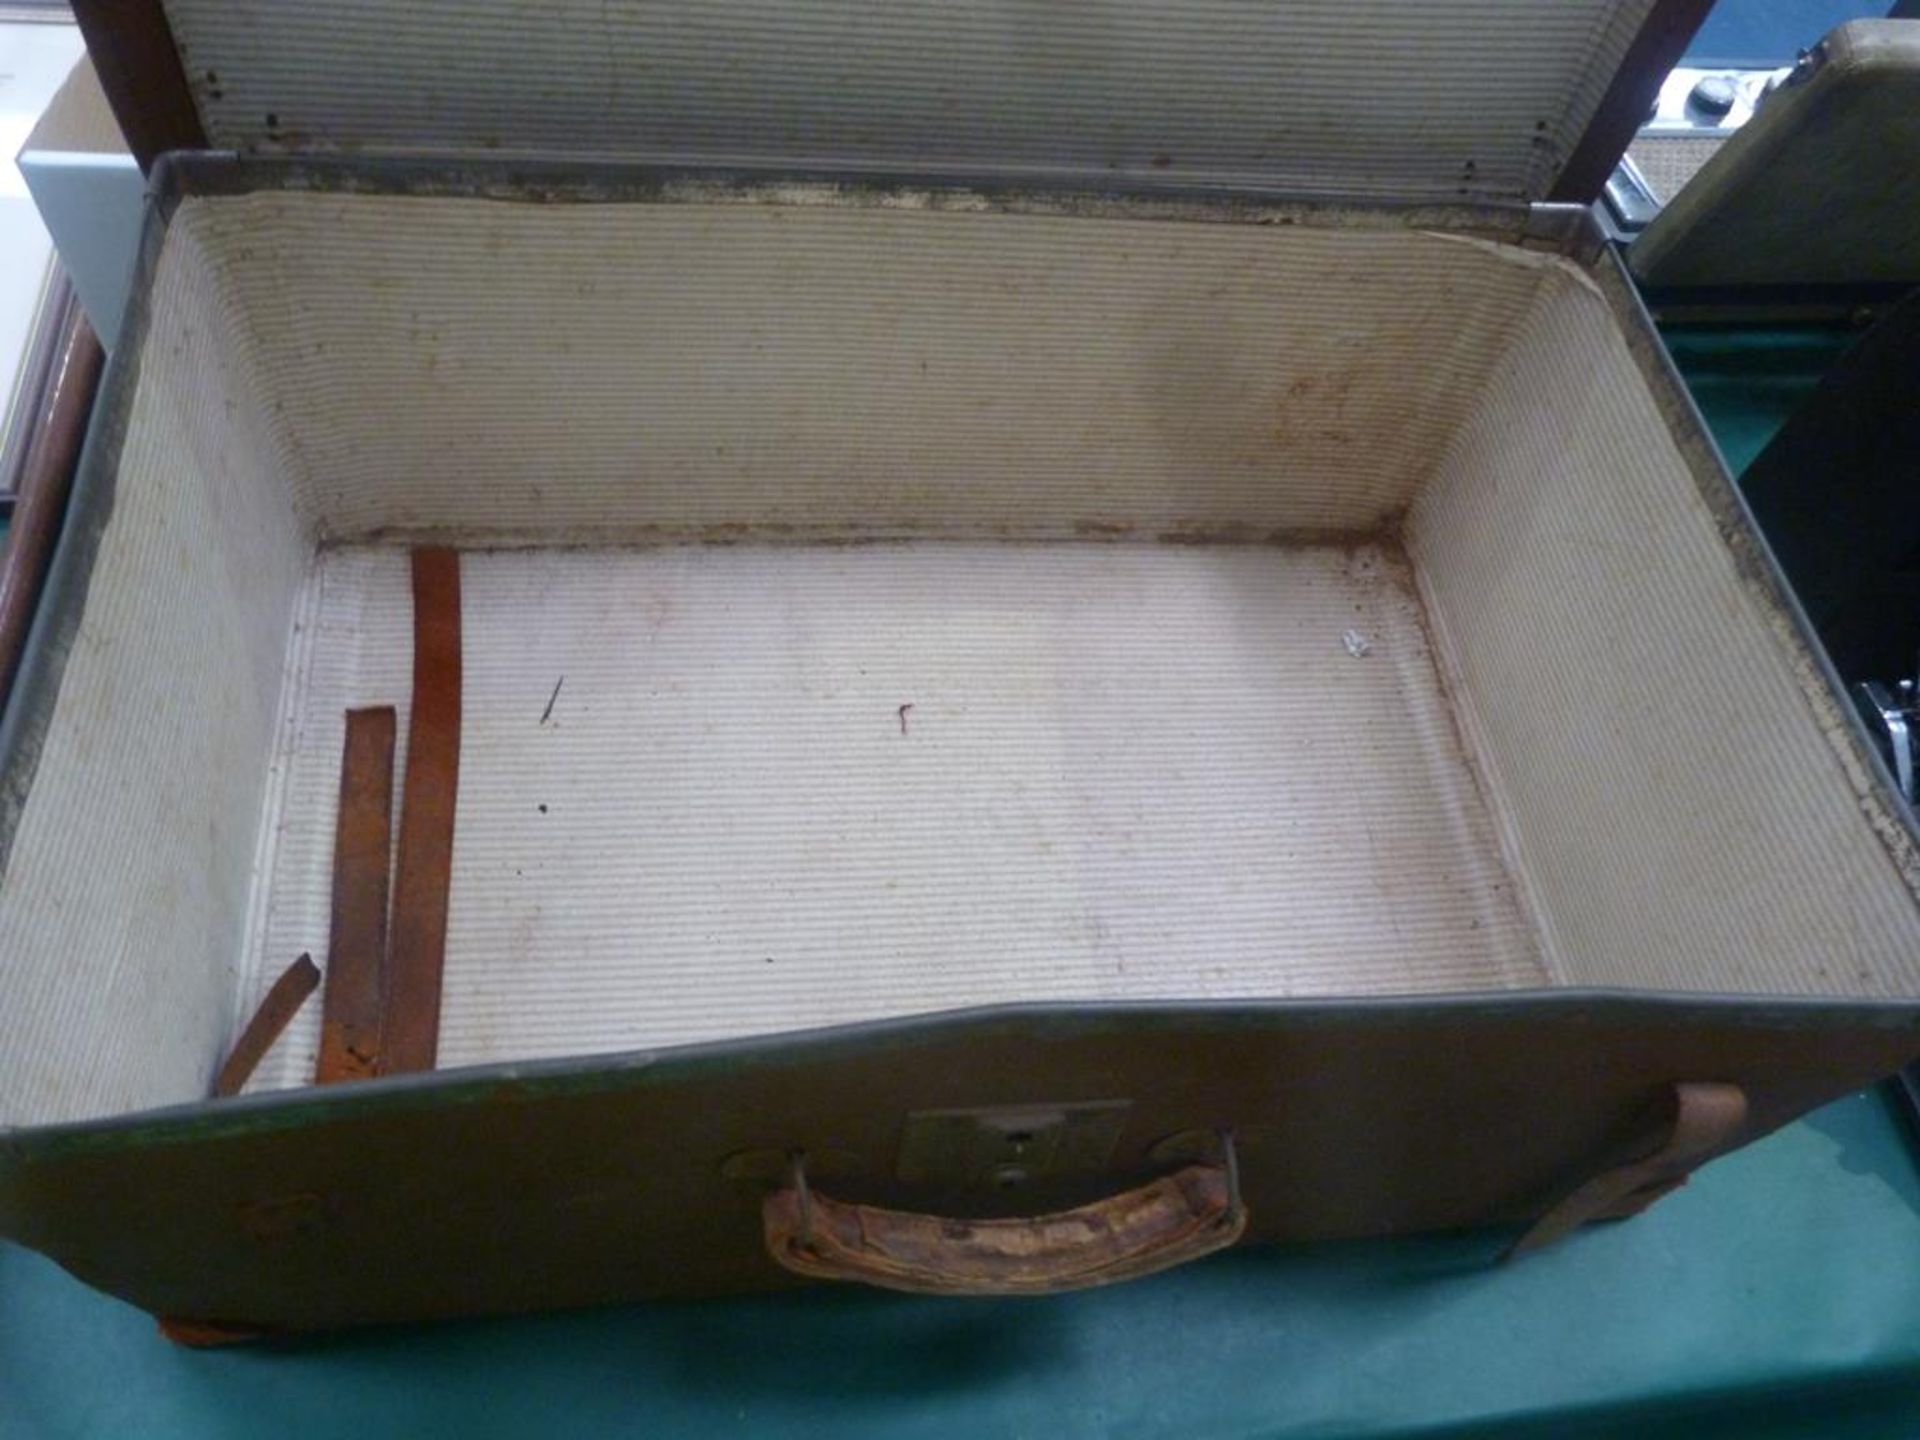 An Early Trunk Suitcase with Reinforced Corners (H21cm, W62cm, D42cm) (Est.£20-£40) - Image 5 of 6